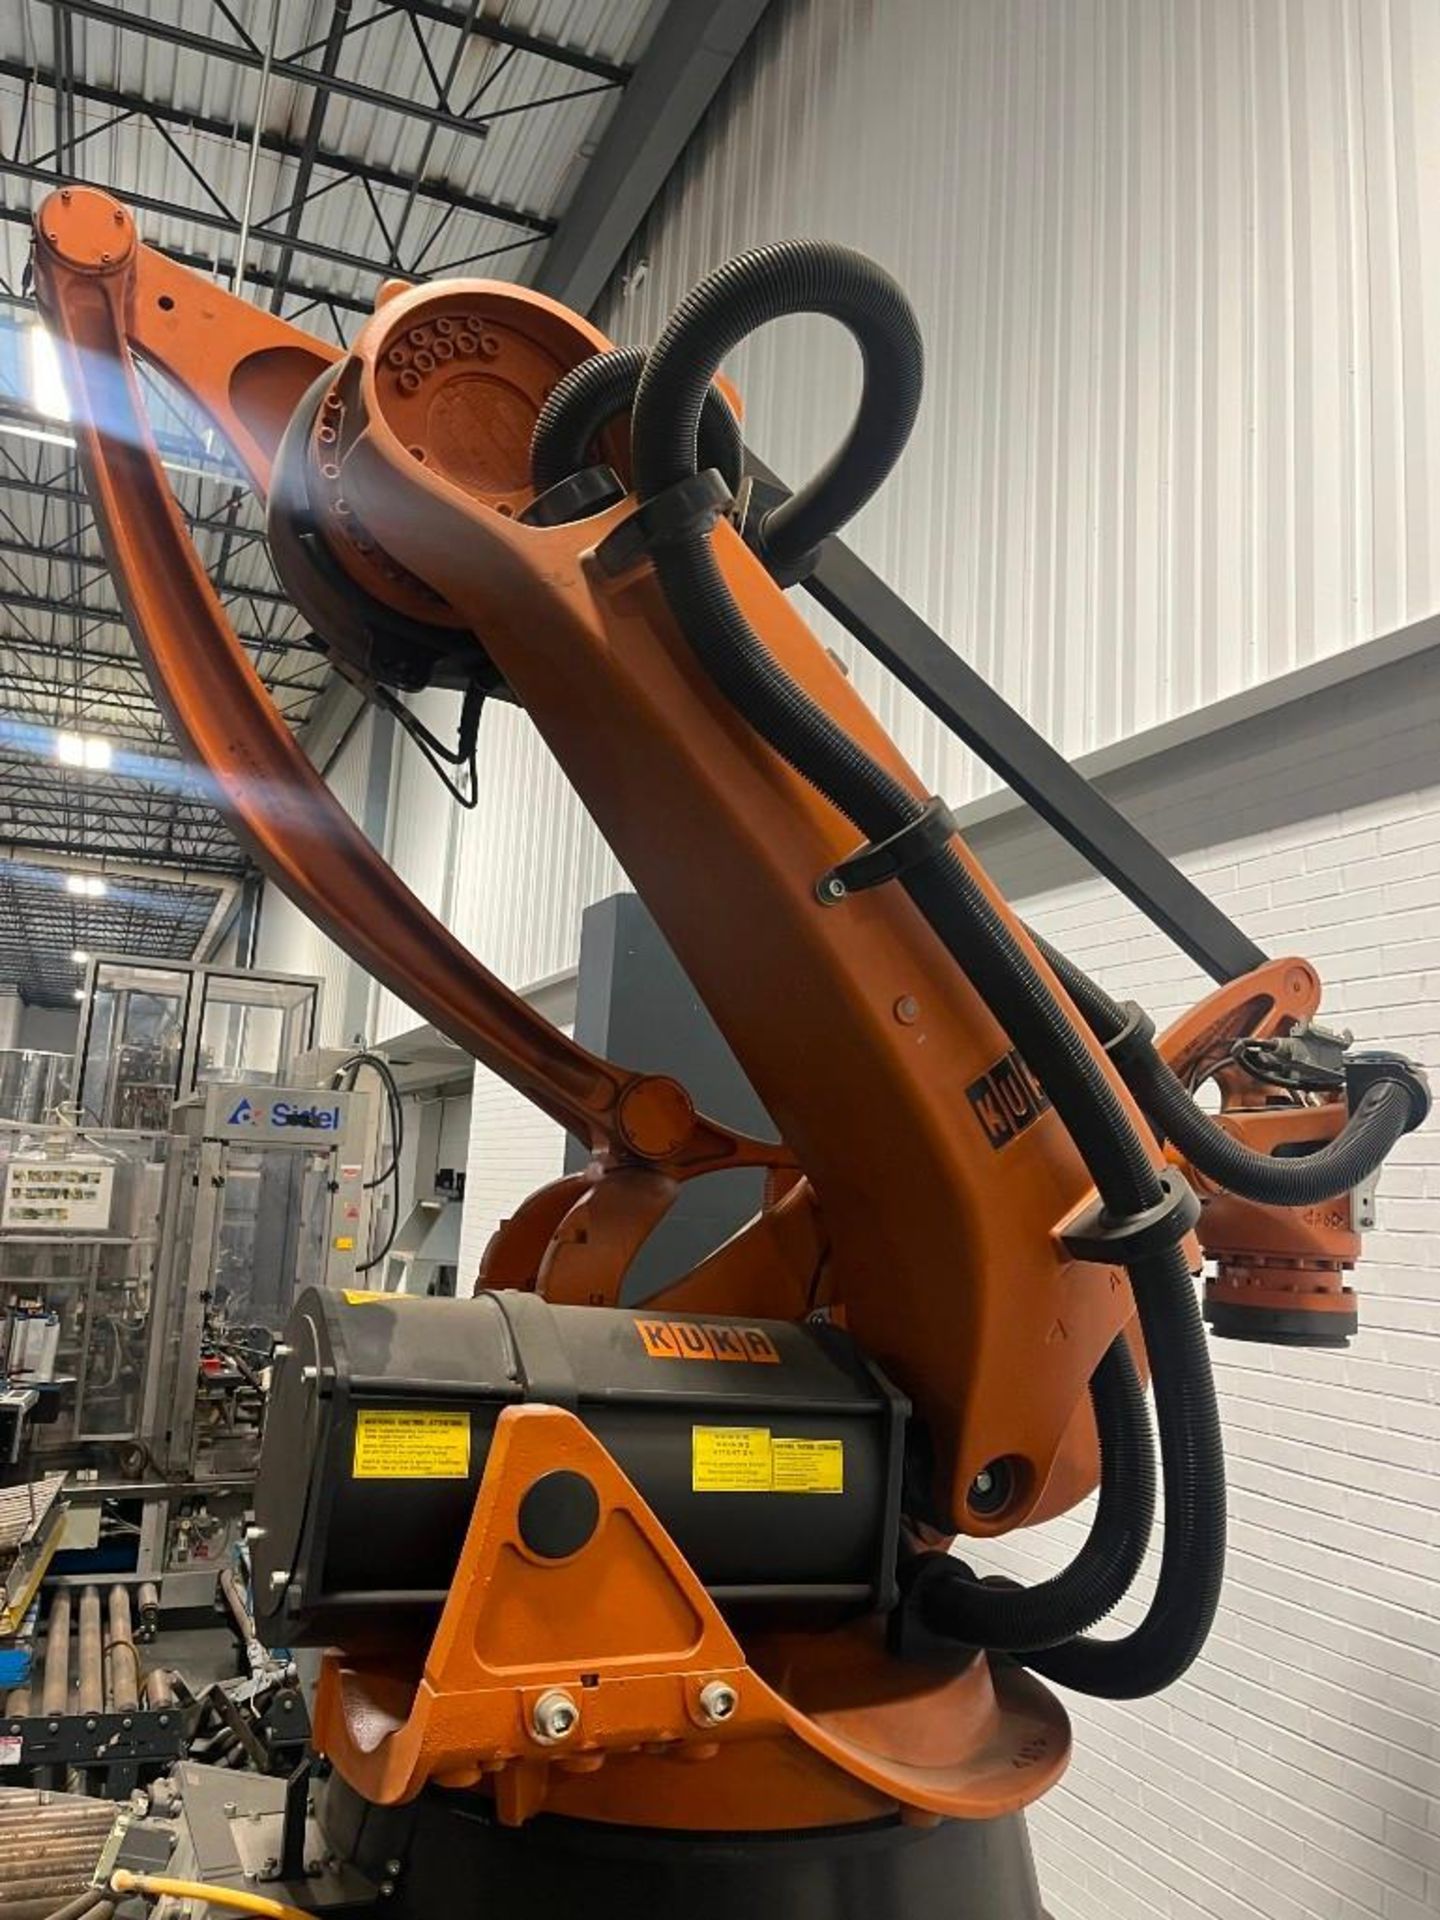 Wulftec/Kuka Robotic Palletizing System, Model ECOPAL. Includes (1) Wulftec automatic stretch wrappe - Image 46 of 75